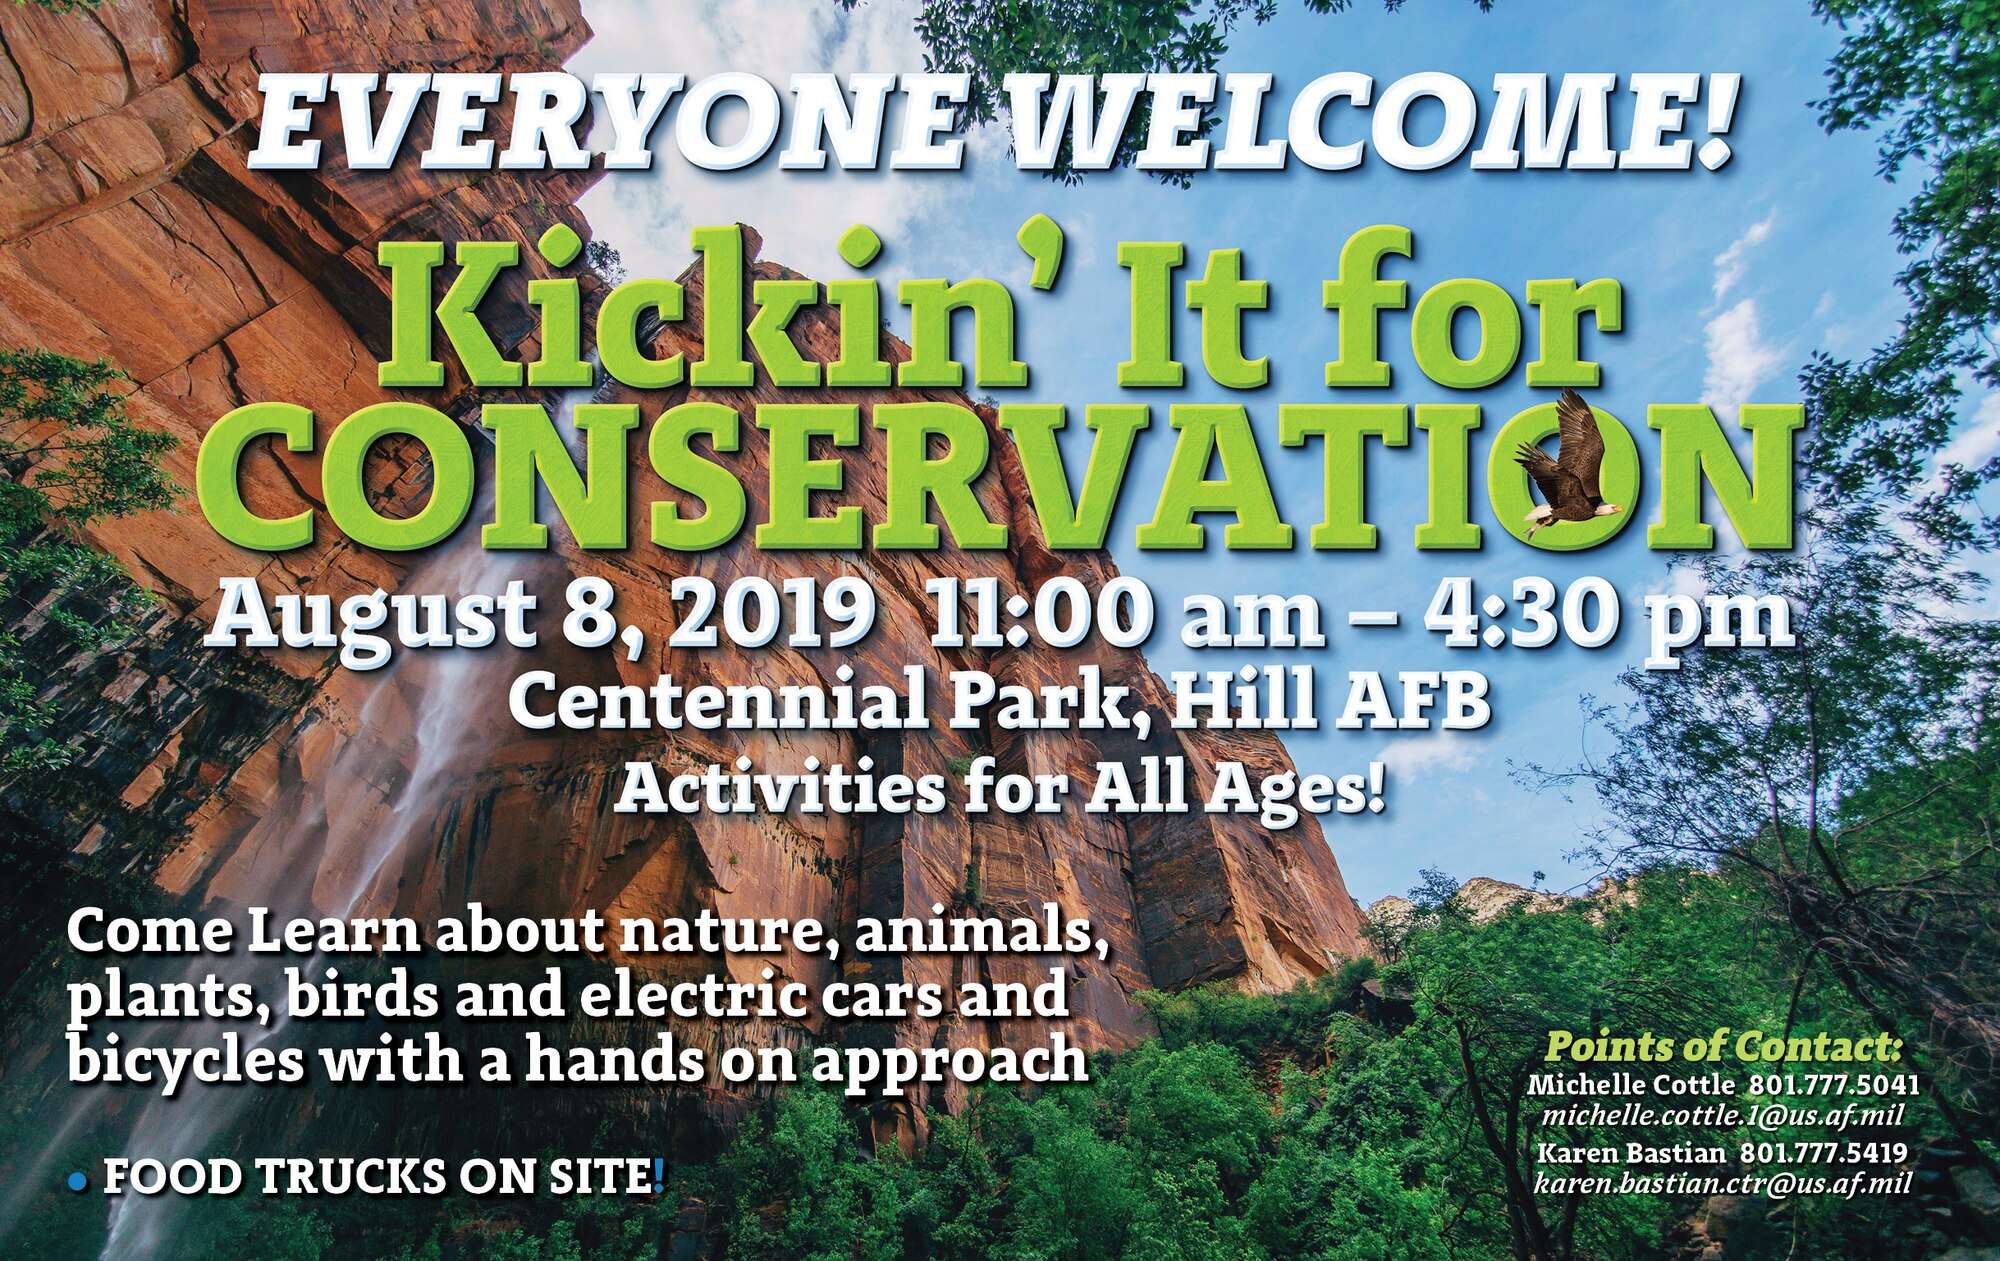 The fourth annual Kickin’ It for Conservation, an energy and environmental fair, will be held from 11 a.m.-4:30 p.m. Aug. 8, 2019, at Hill Air Force Base, Utah. The event will be held at Centennial Park. There will be displays, booths, hands-on activities, and food for all ages. The event will be free and open to those with access to the base. (U.S. Air Force graphic by Kent Bingham)